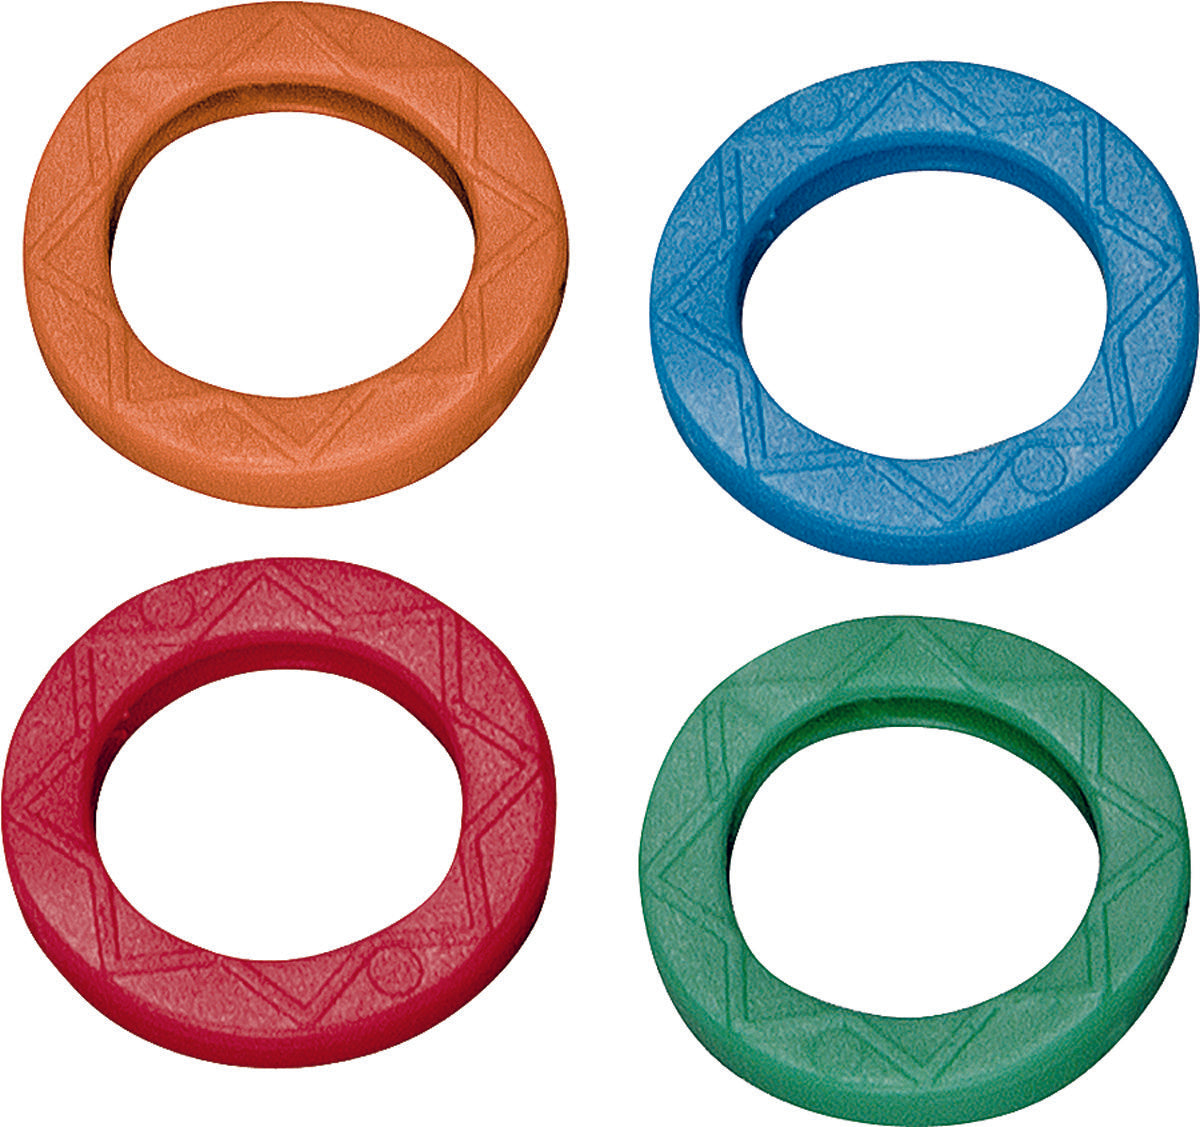 Assorted Color Key Identifiers – Pack of 4